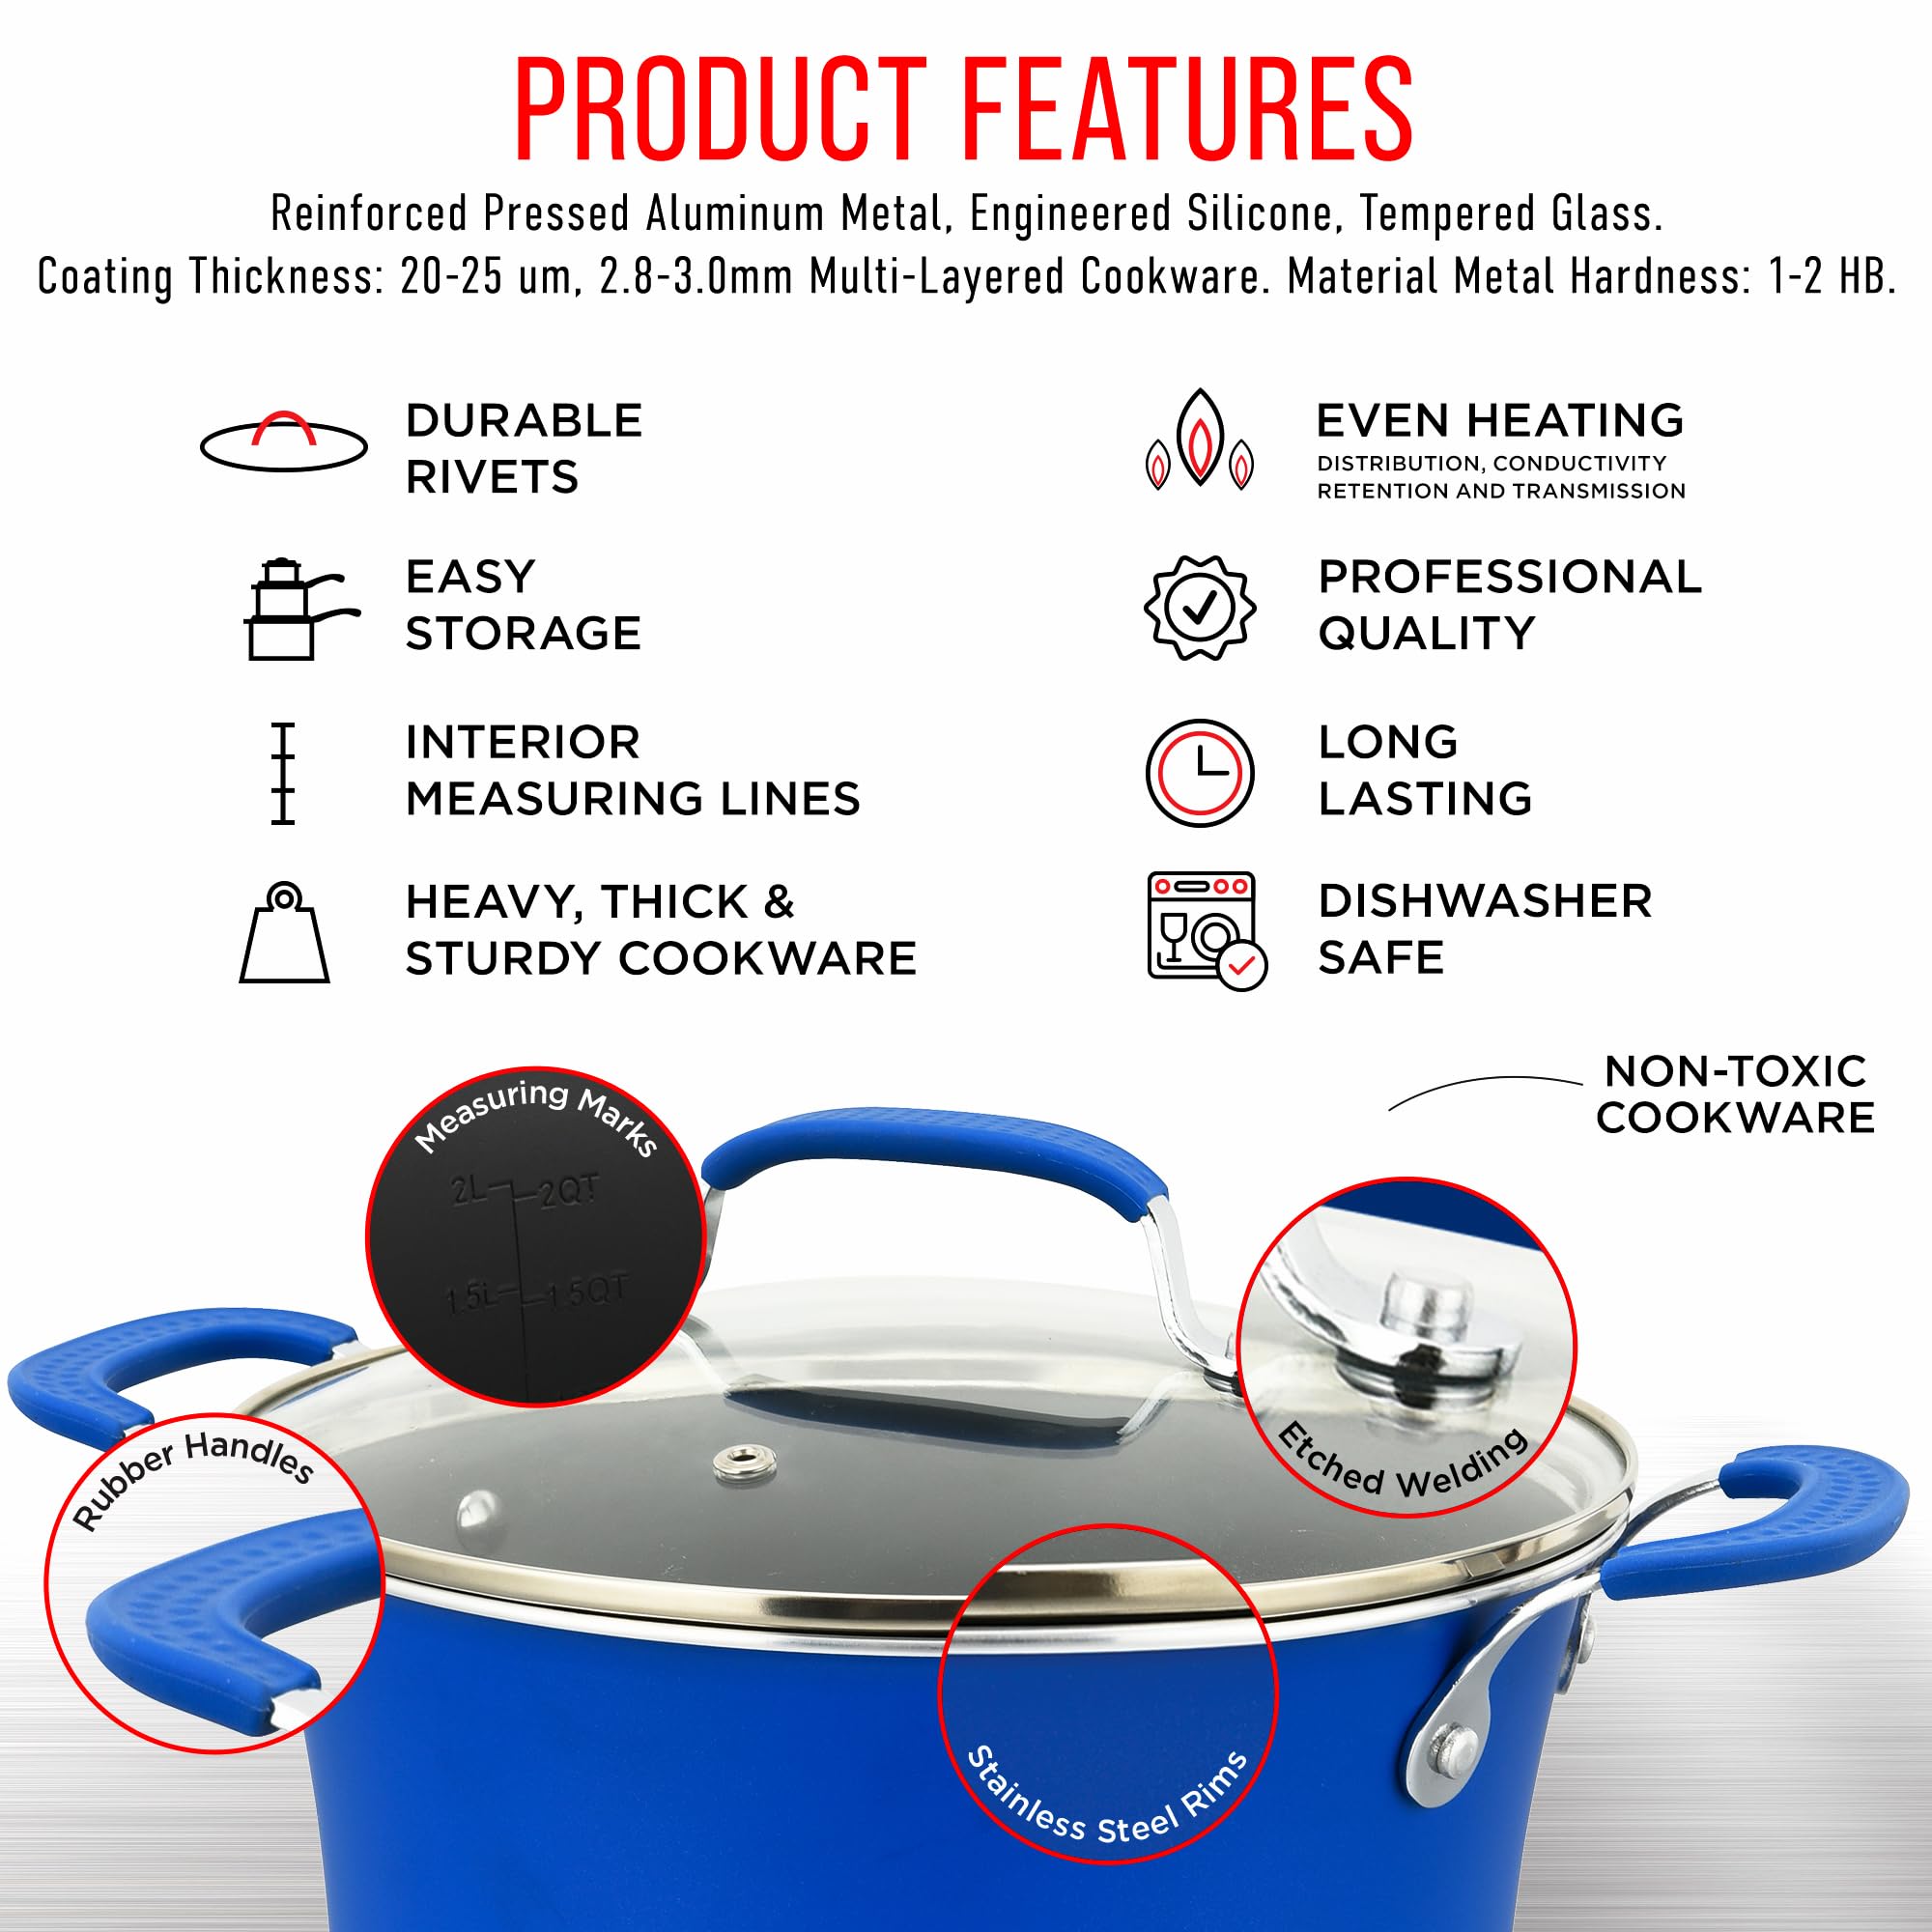 Cookware Set – 23 Piece –Blue Multi-Sized Cooking Pots with Lids, Skillet Fry Pans and Bakeware – Reinforced Pressed Aluminum Metal - Suitable for Gas, Electric, Ceramic and Induction by BAKKEN Swiss